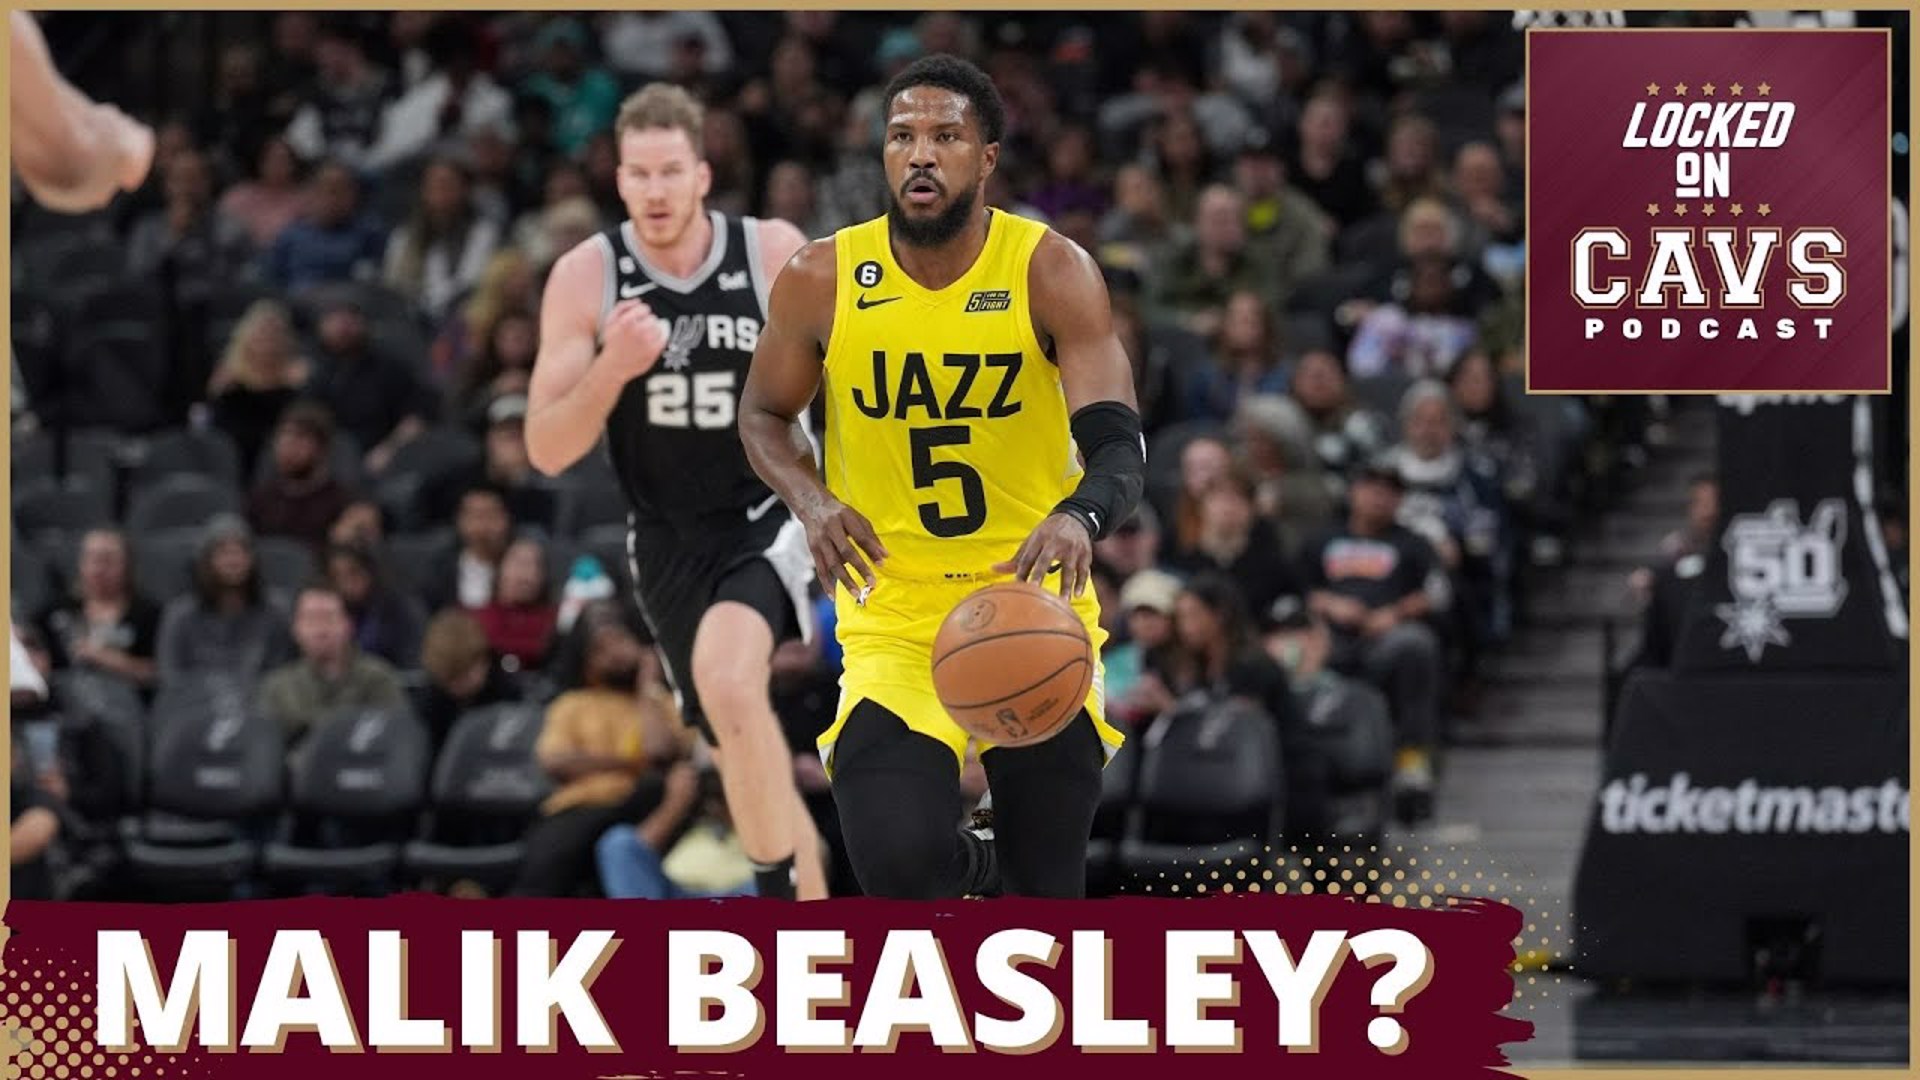 Chris Manning and Evan Dammarrell discuss reports that the Cavs have interest in Utah Jazz wing Malik Beasley.